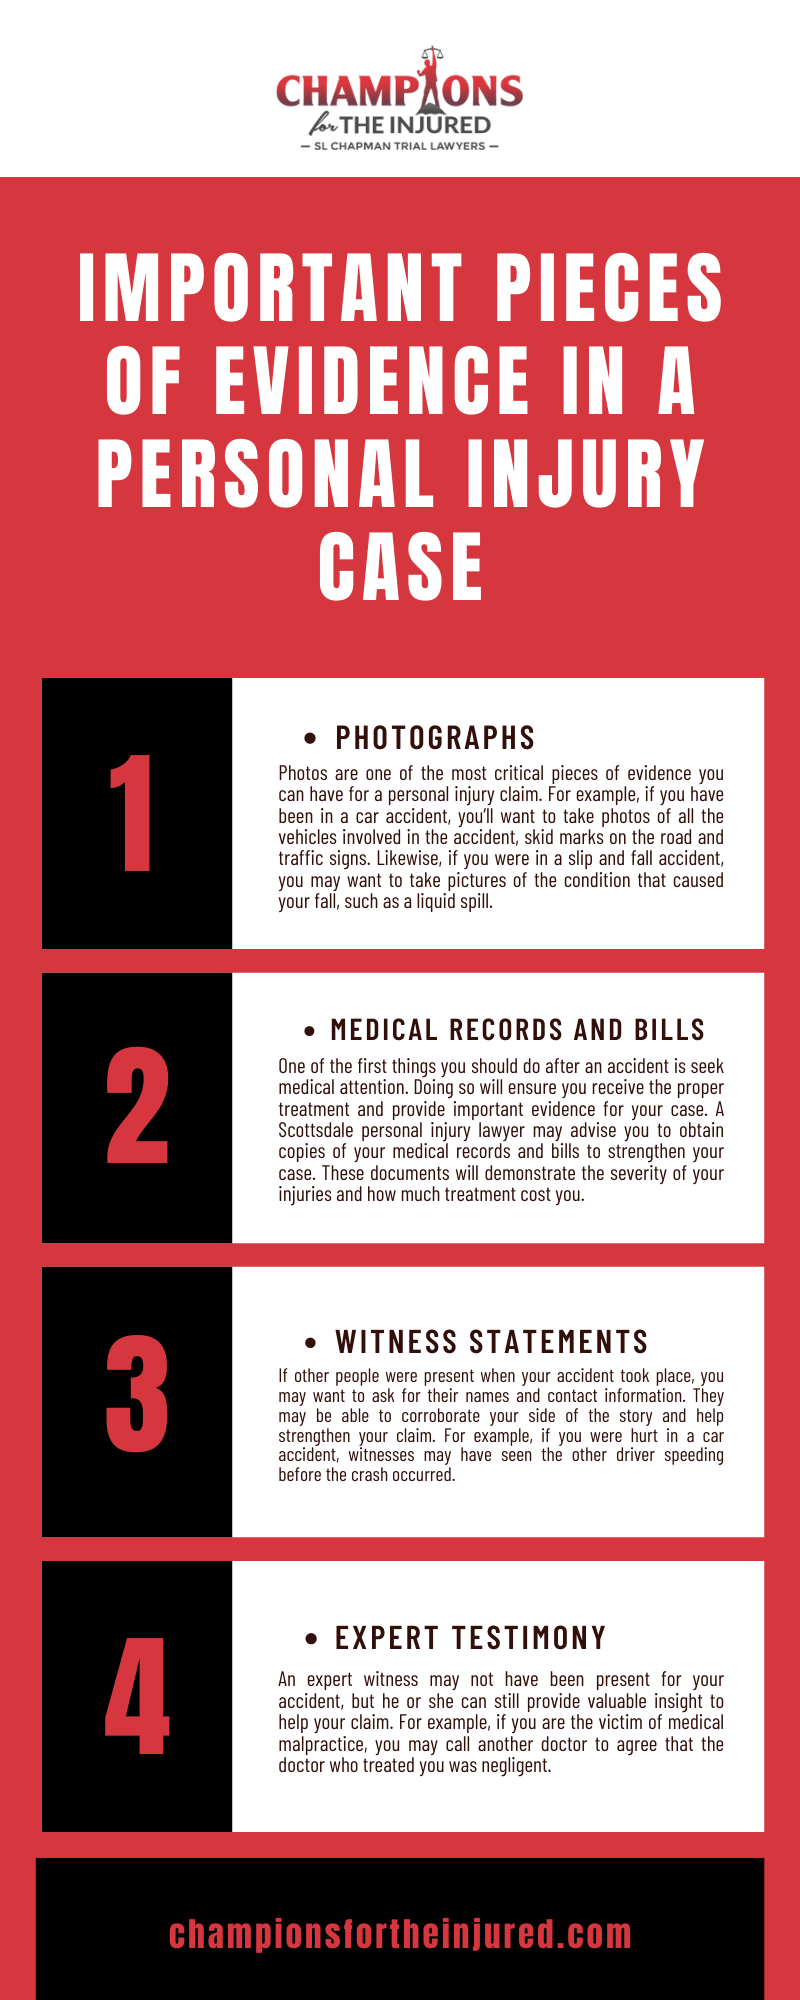 IMPORTANT PIECES OF EVIDENCE IN A PERSONAL INJURY CASE INFOGRAPHIC